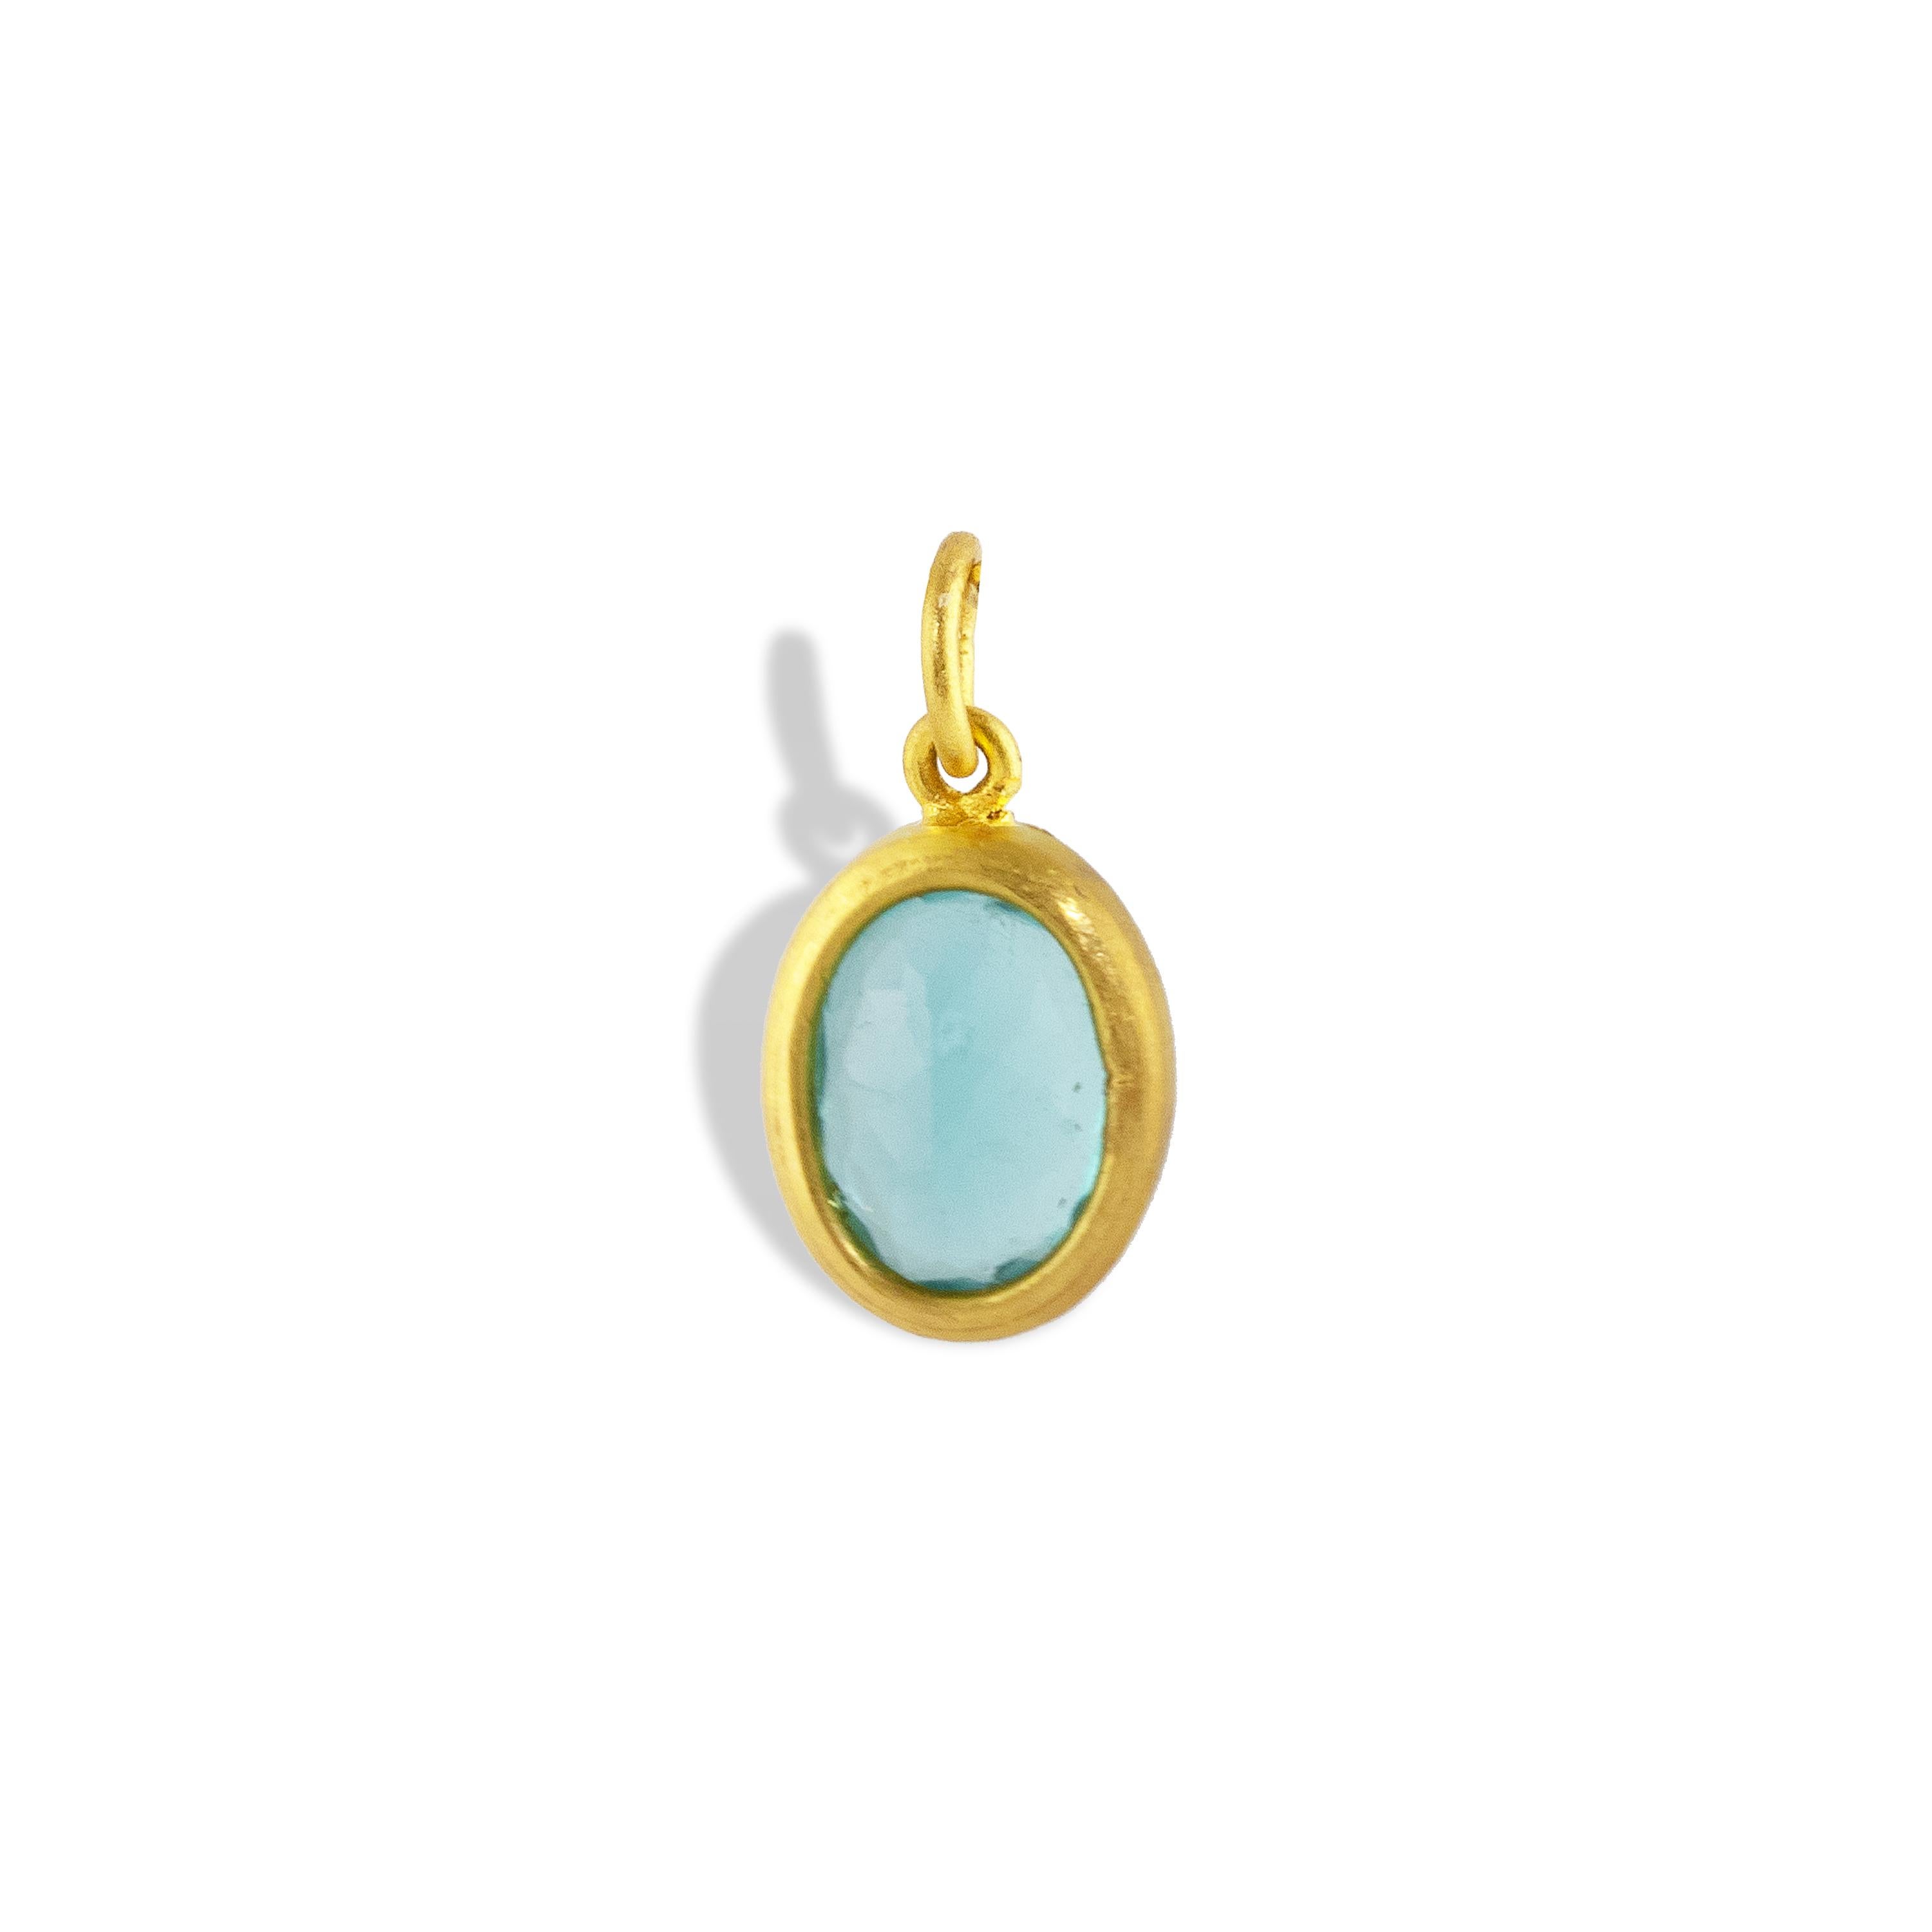 Contemporary Ico & the Bird Electric Blue Apatite 22k Gold Oval Pendant